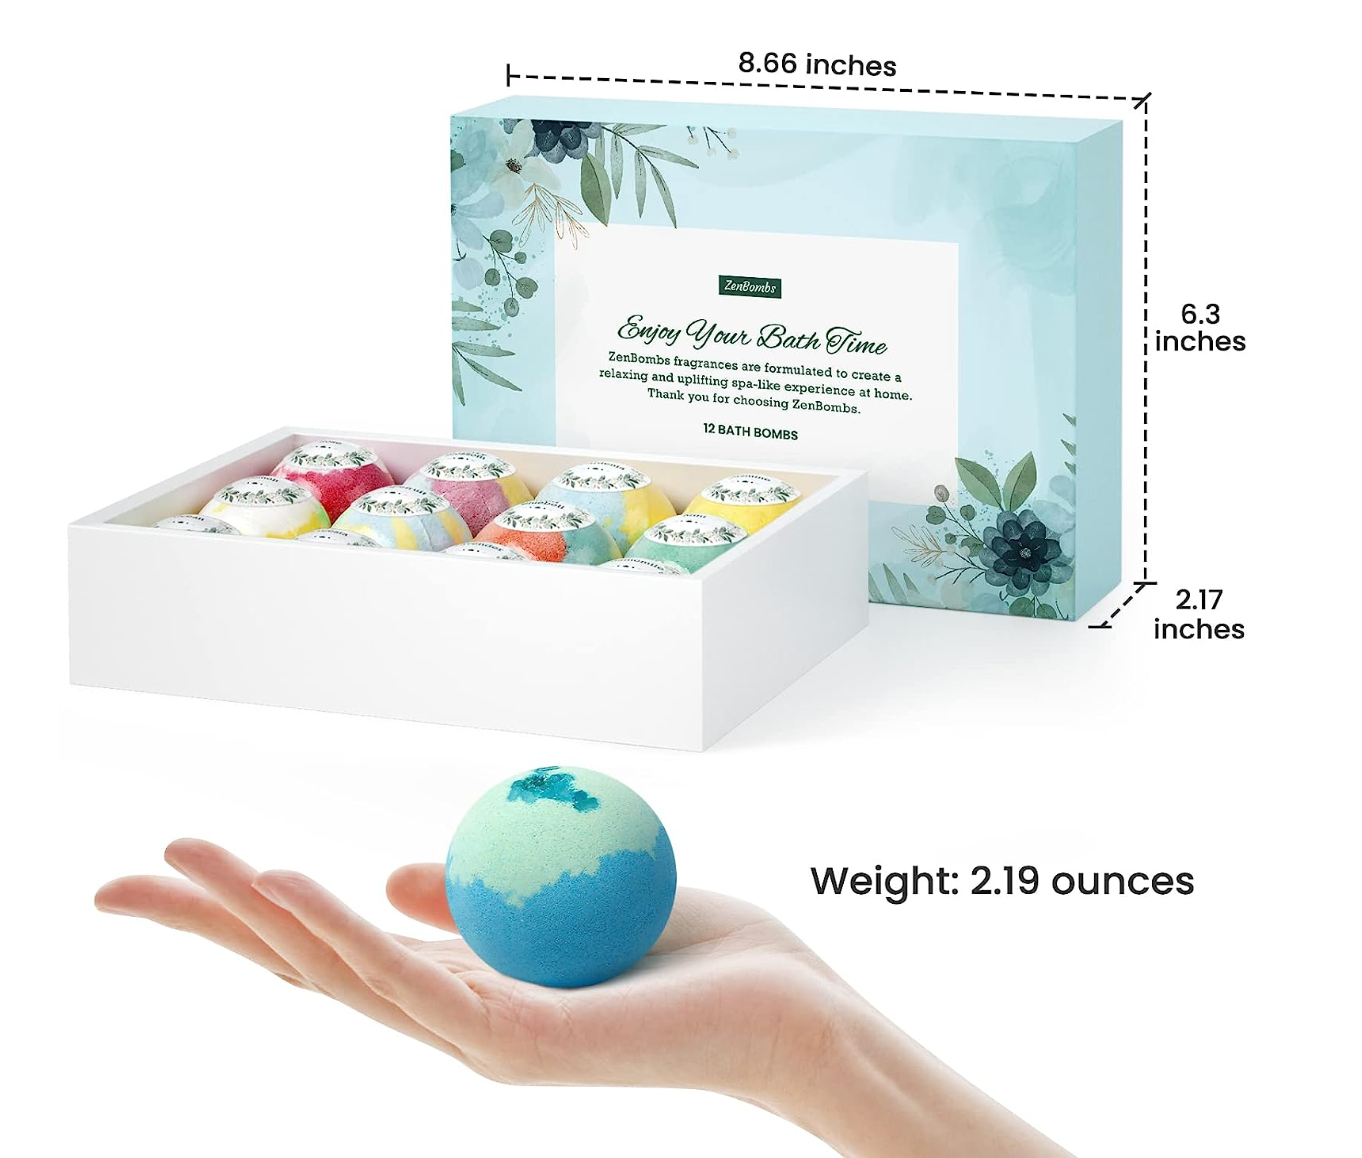 ZenBombs Bath Bombs for Women, 12pcs Handmade Natural Bath Bomb Gift Set, Fizzies Relaxing Spa Bath with Shea Butter & Essential Oils, Amazing Gift for Her, Wife, Girlfriend, Mother